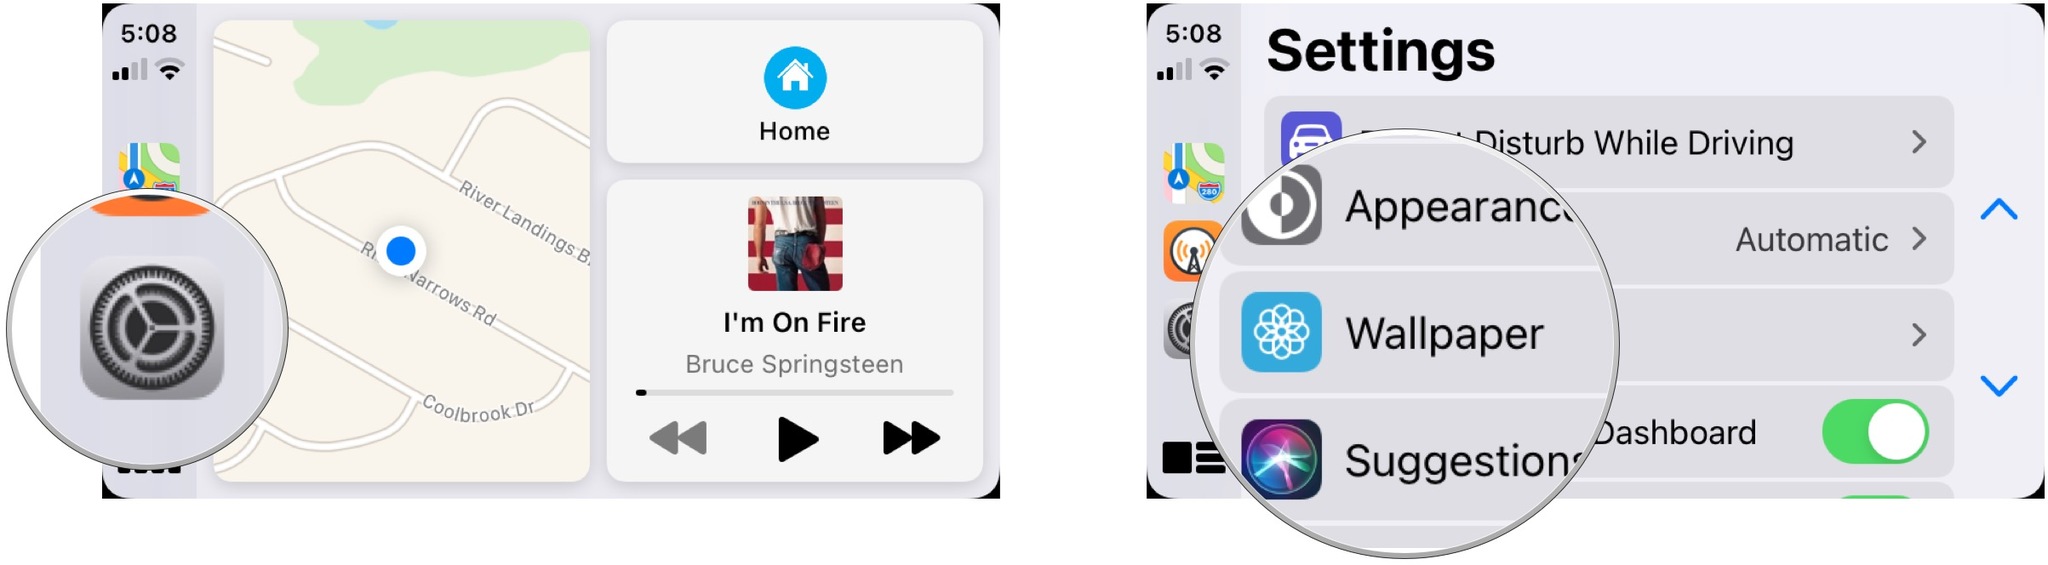 Set wallpaper in CarPlay, showing how to open Settings, then tap Wallpaper